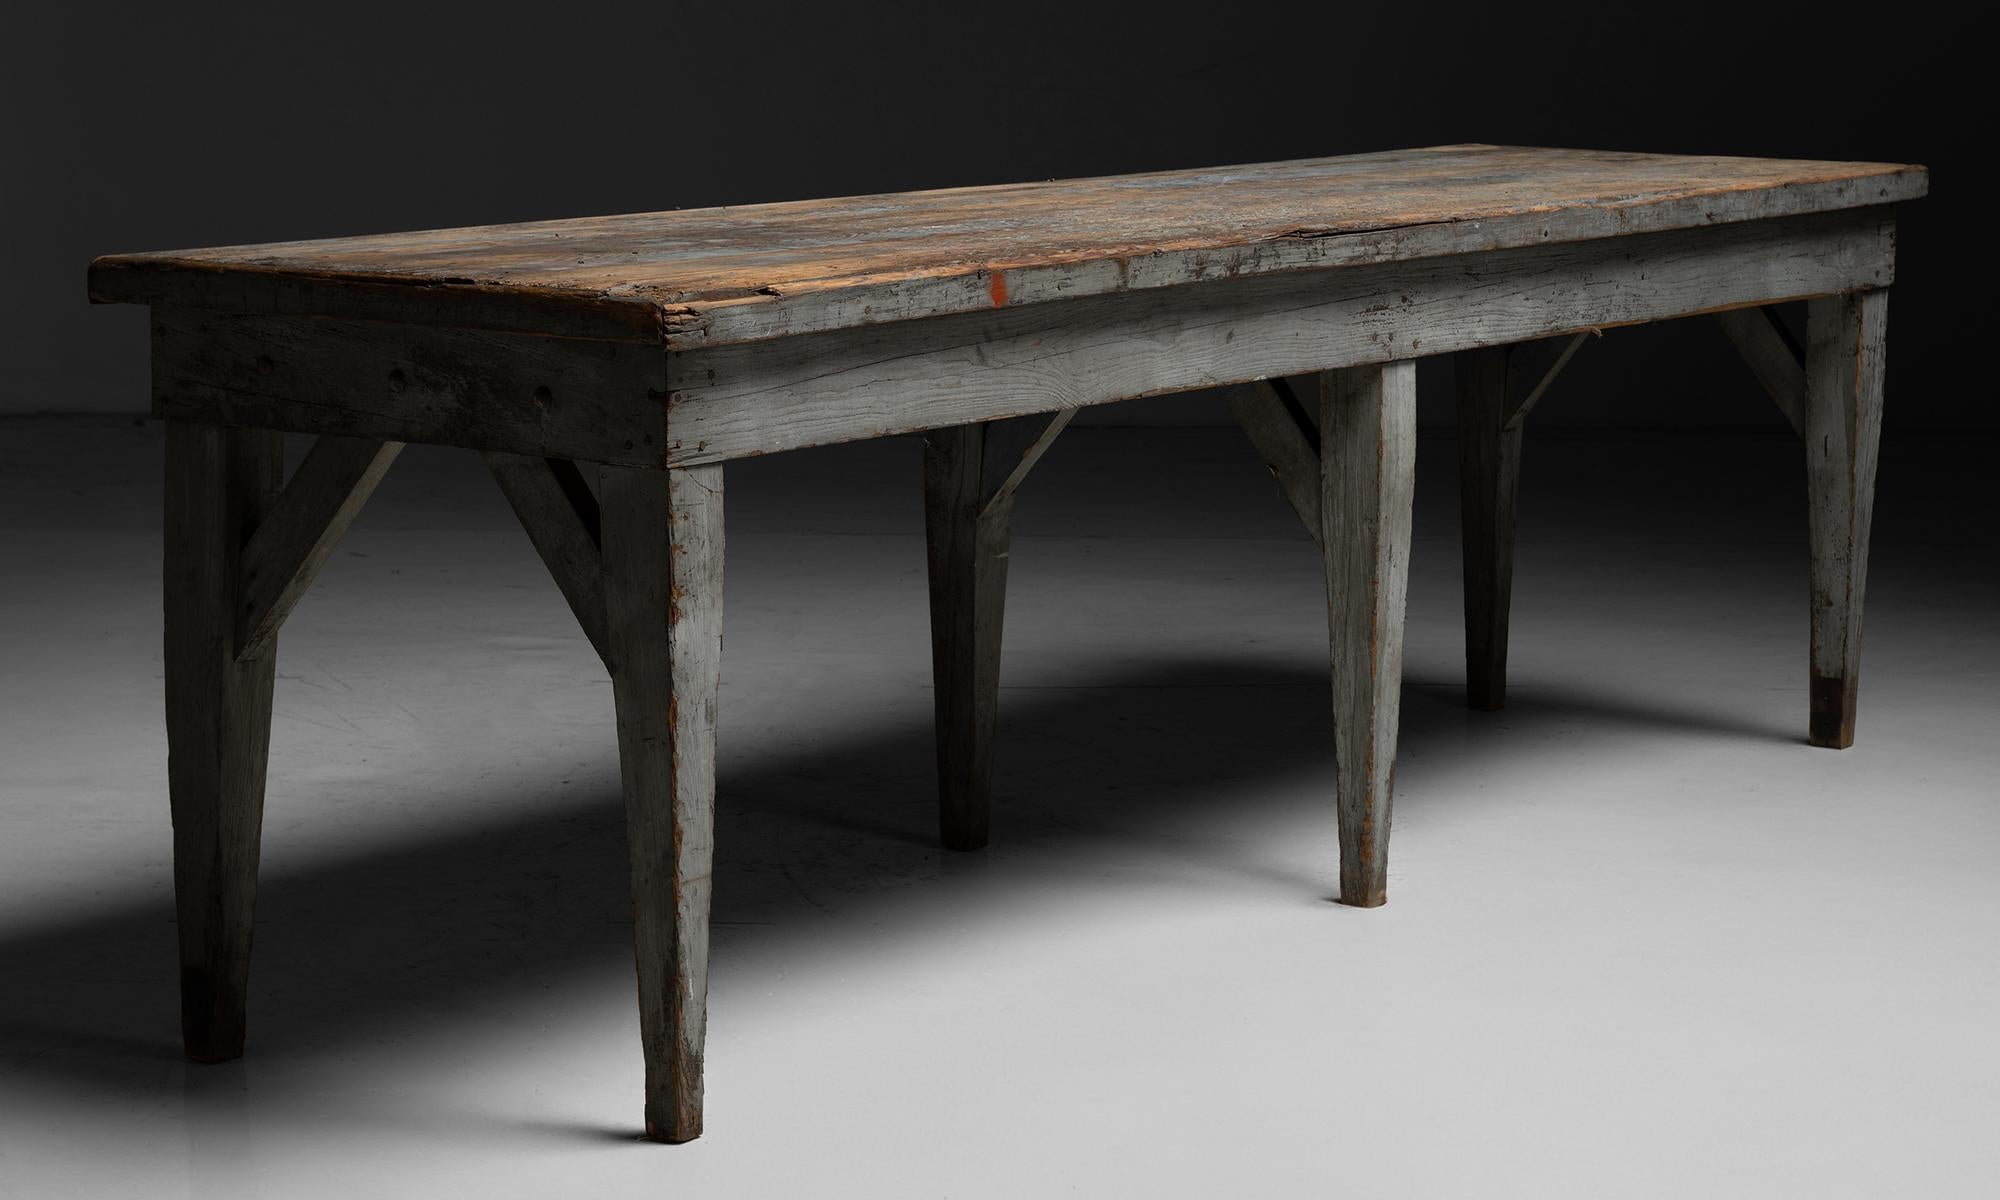 Industrial Work Table

America circa 1930

Weathered painted surface with six legs and angled support beams.

118”L x 31.5”d x 34.75”h